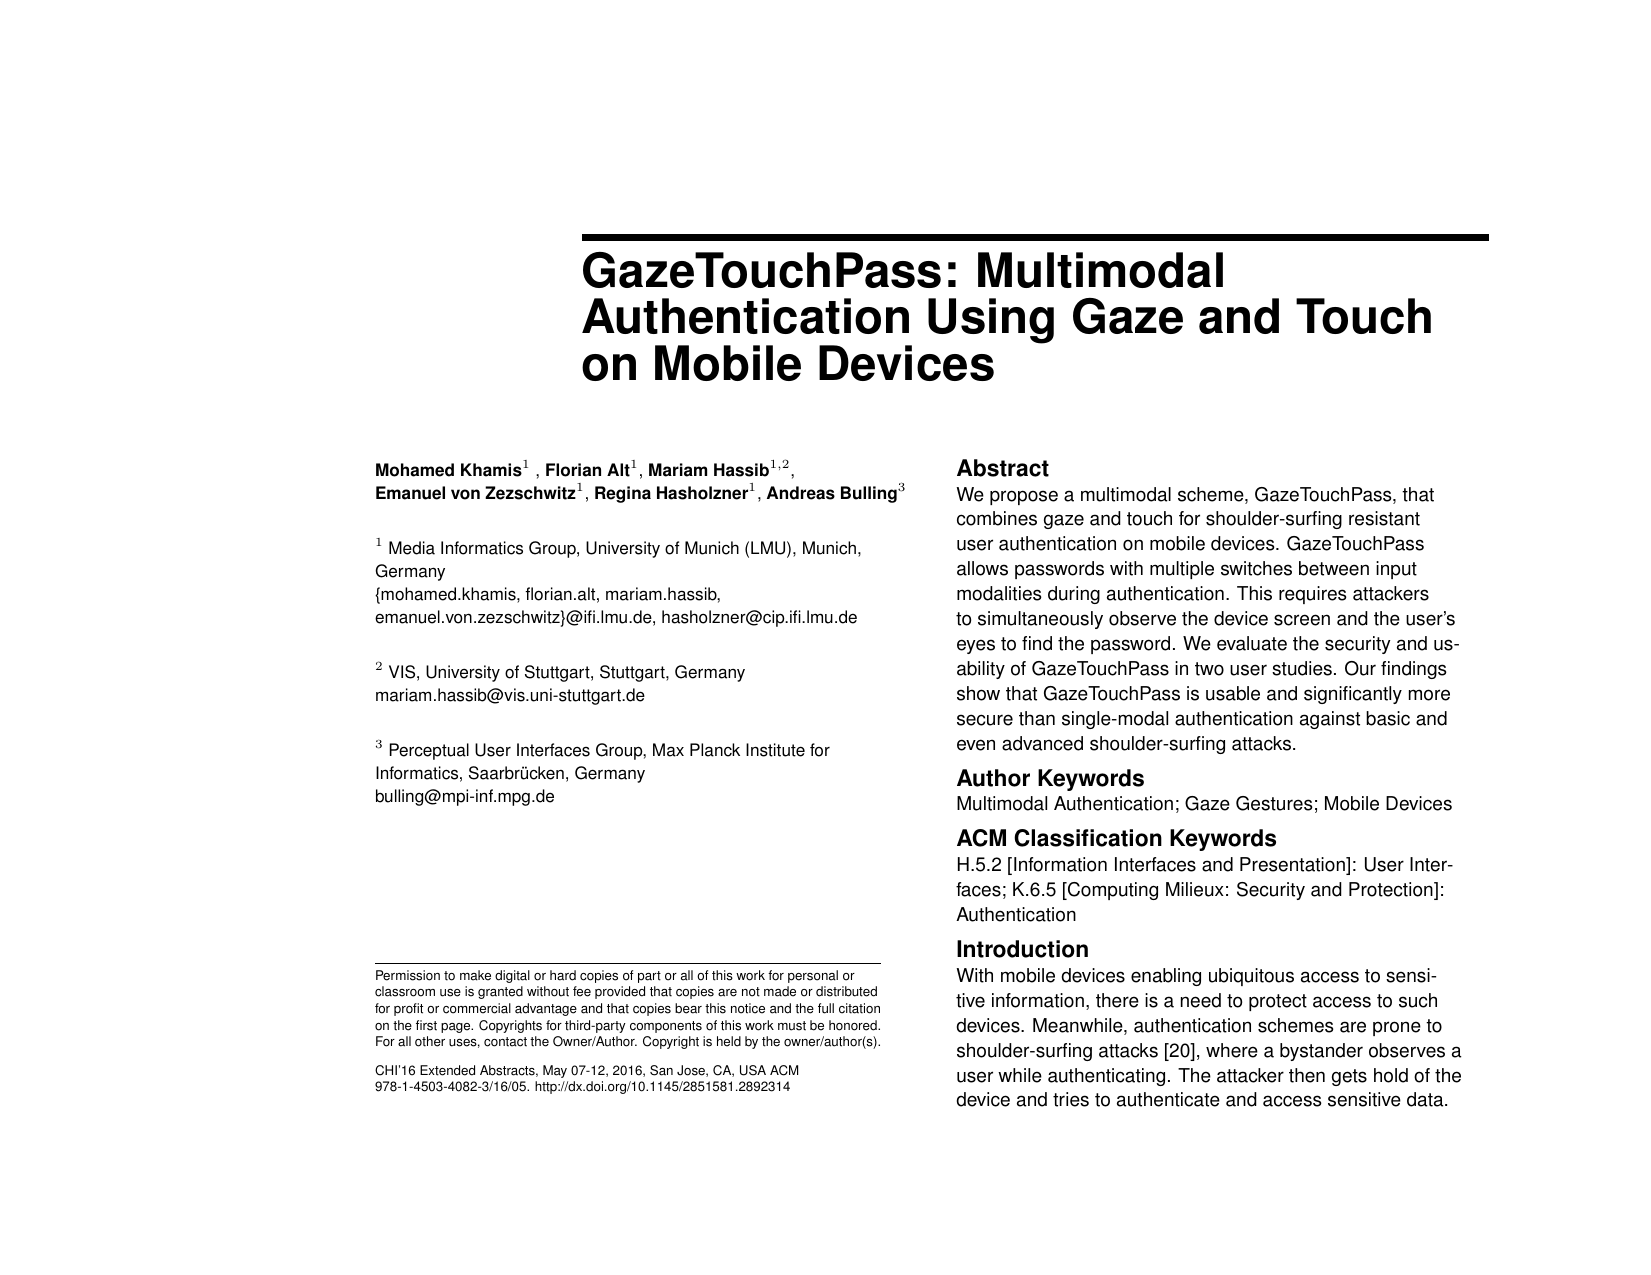 GazeTouchPass: Multimodal Authentication Using Gaze and Touch on Mobile Devices